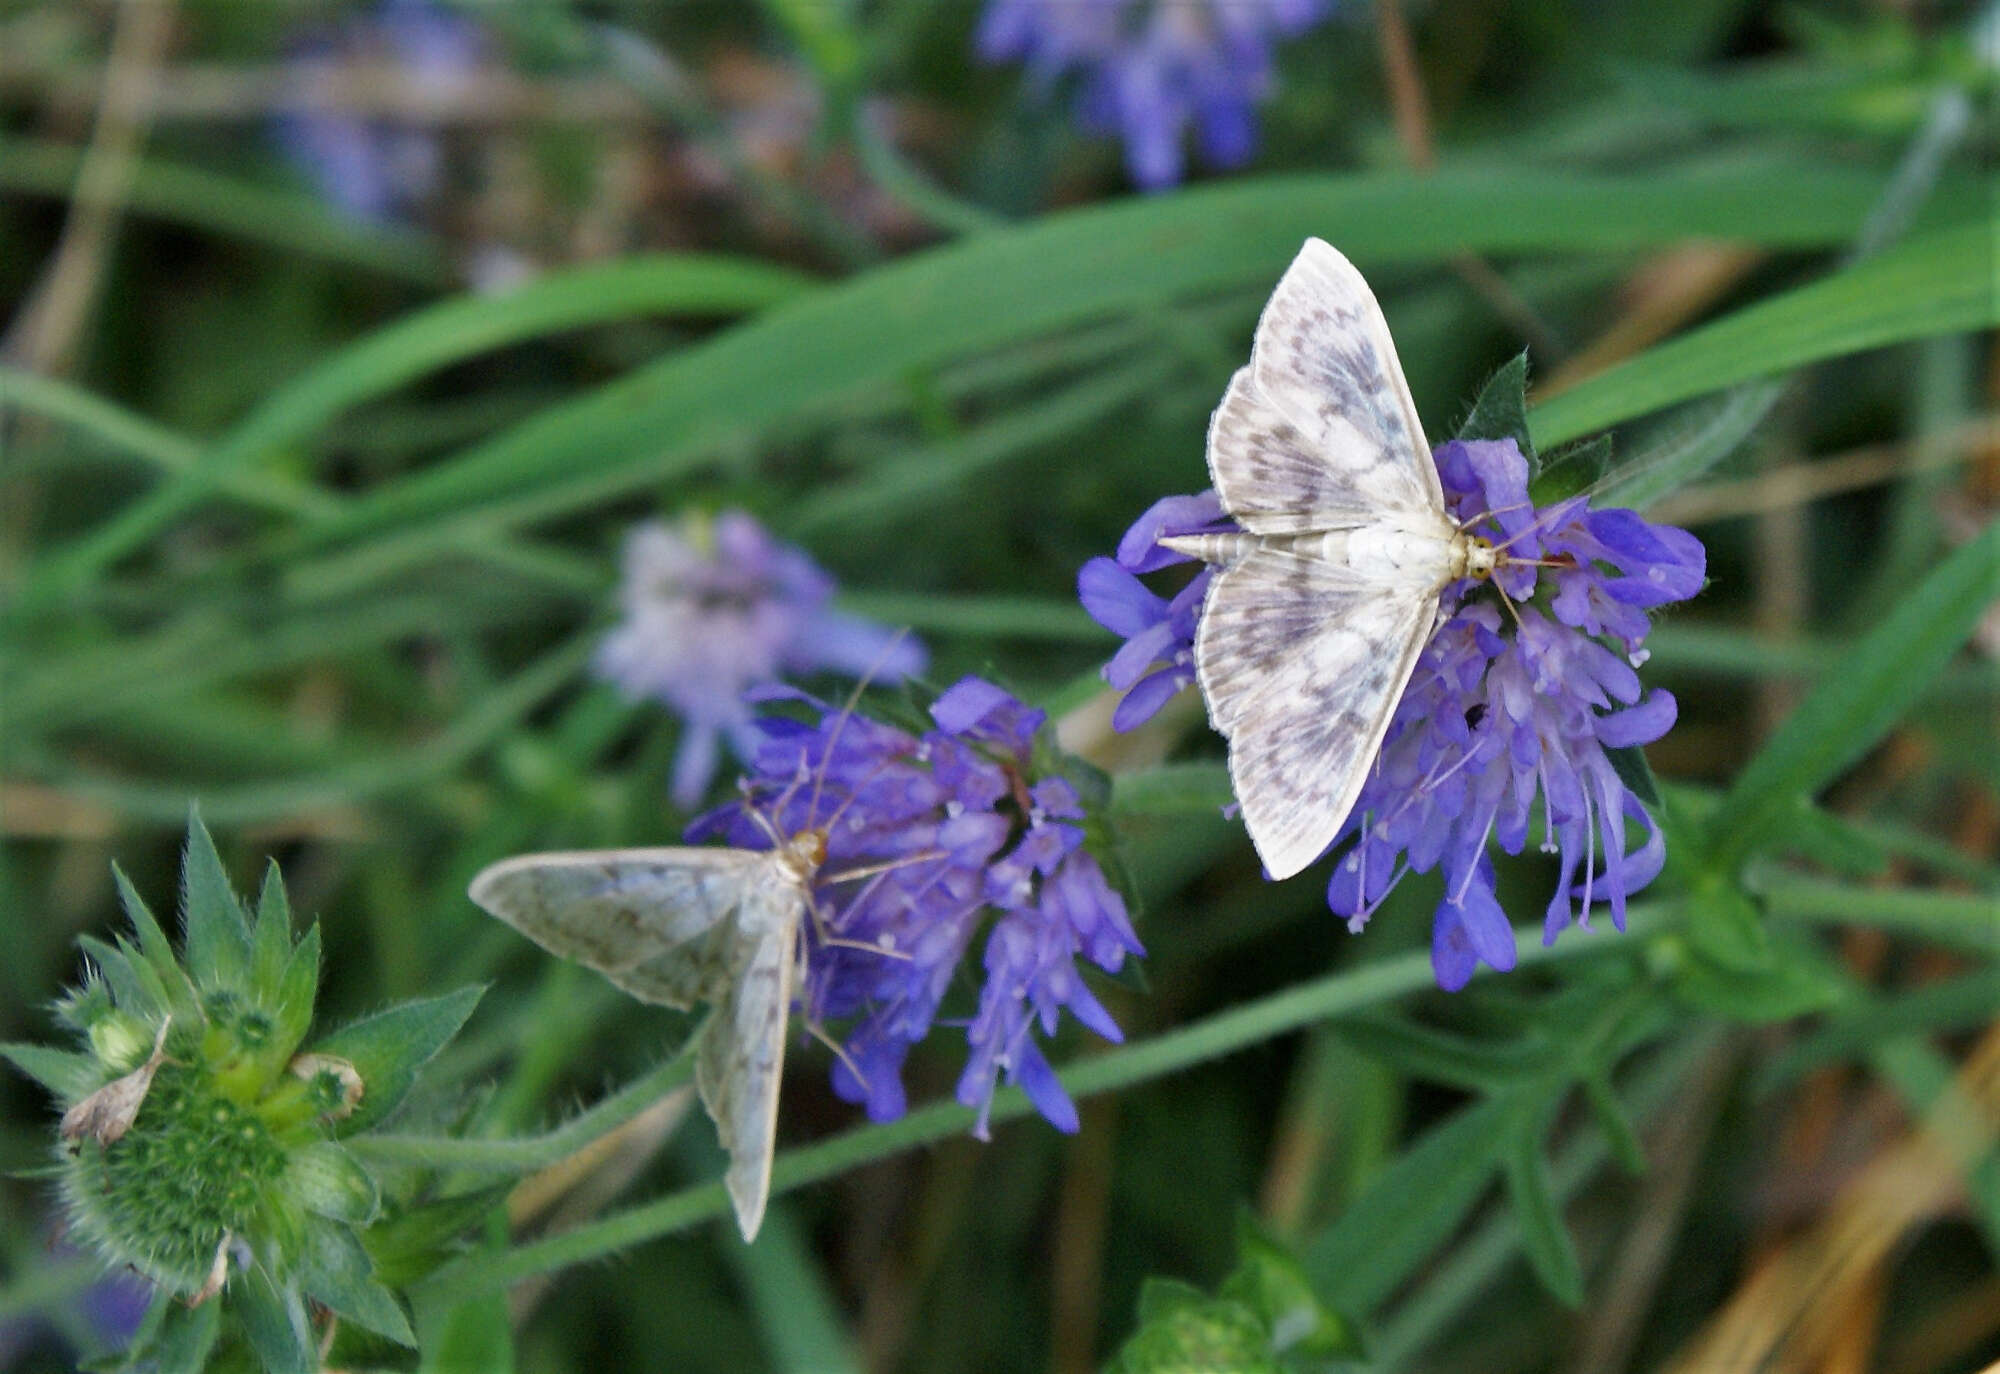 followed by the beautiful Mother of Pearl, seen here on scabious.